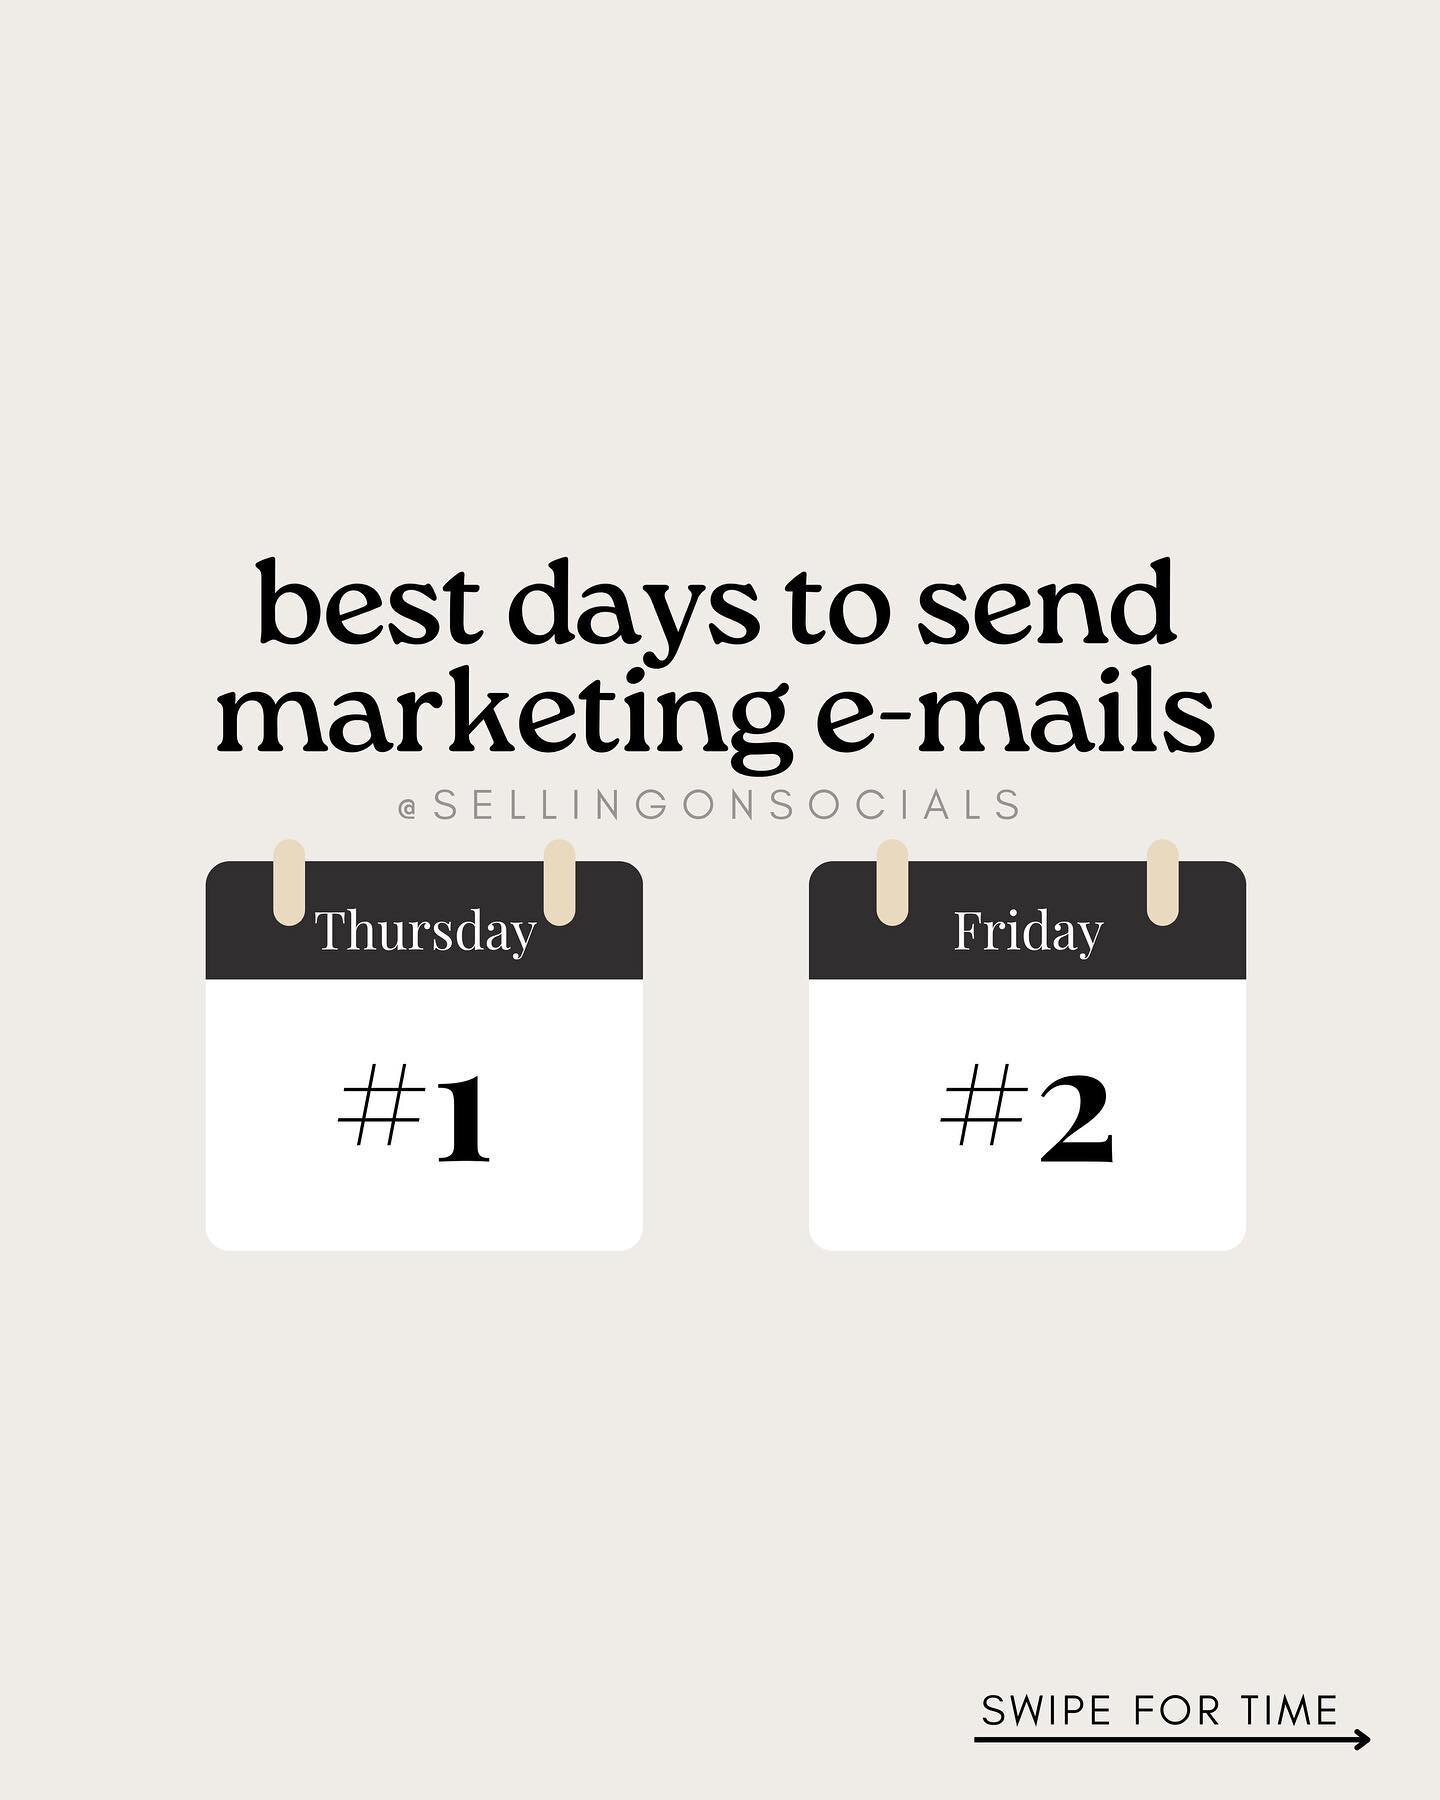 🗝️ Maximizing your marketing reach is key! 🗝️ 

Research shows that Tuesdays and Thursdays are the most effective days to send your marketing emails, with the optimal time being 10 AM. Utilizing this knowledge can greatly increase your chances of c